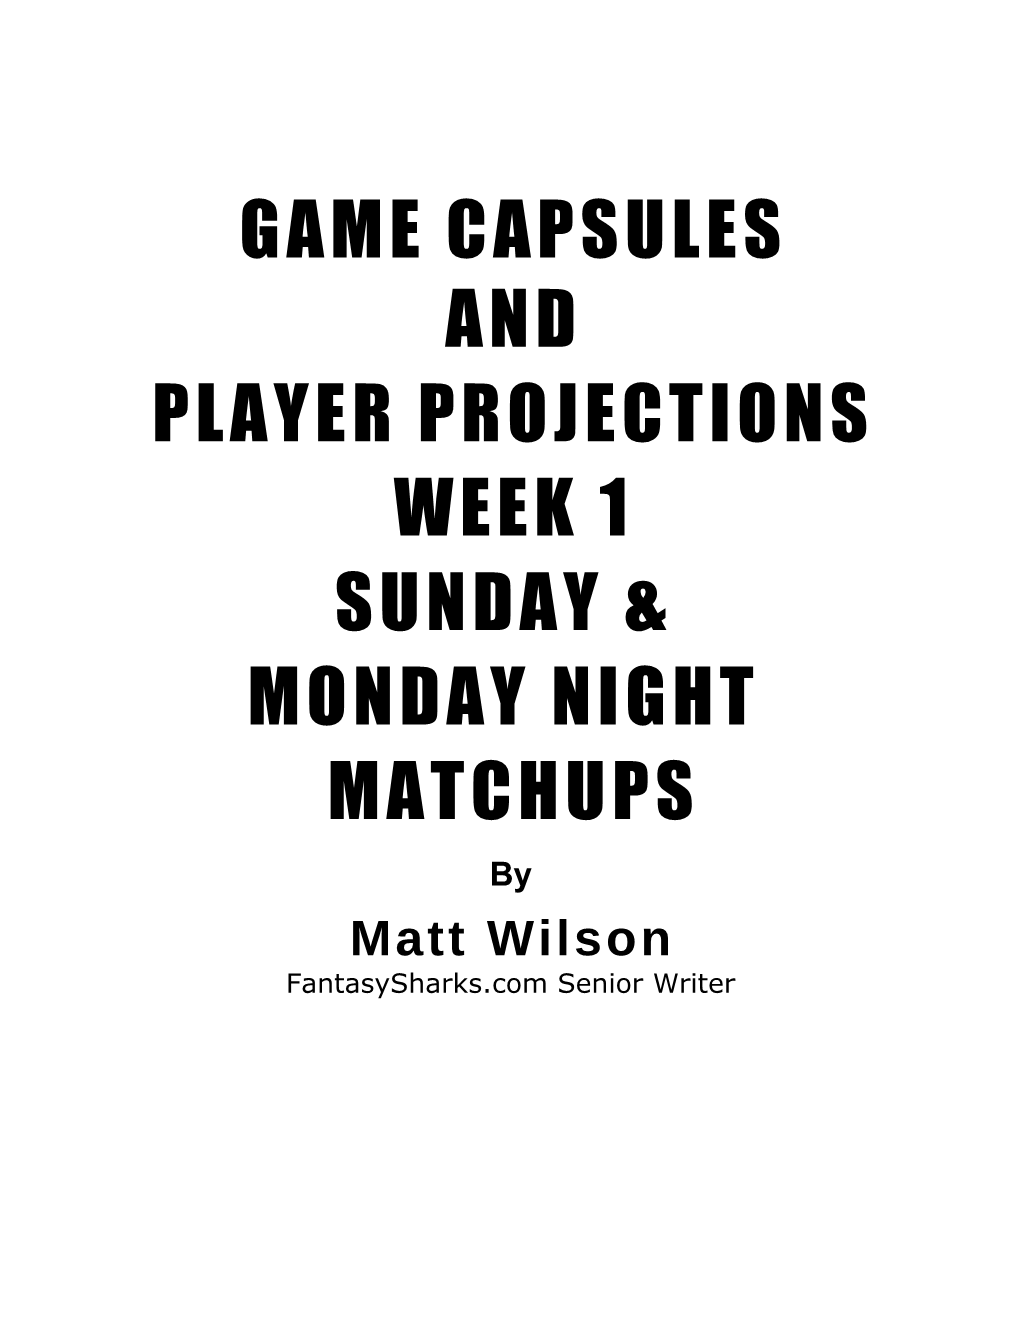 Game Capsules and Player Projections Week 1 Sunday